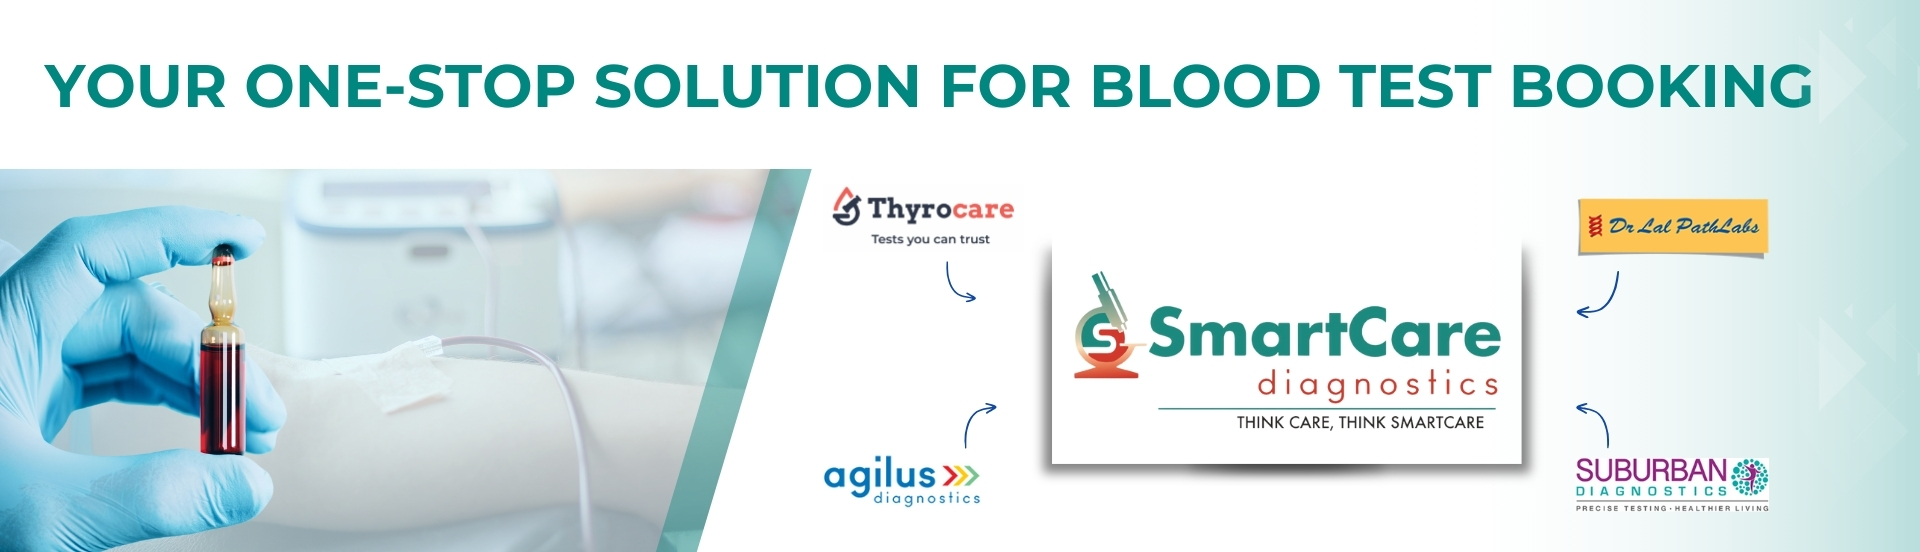 Website banner showcasing blood testing tubes with the text 'All your blood tests in one place,' highlighting four diagnostics companies offering complete blood count tests at different prices under SmartCare Diagnostics.